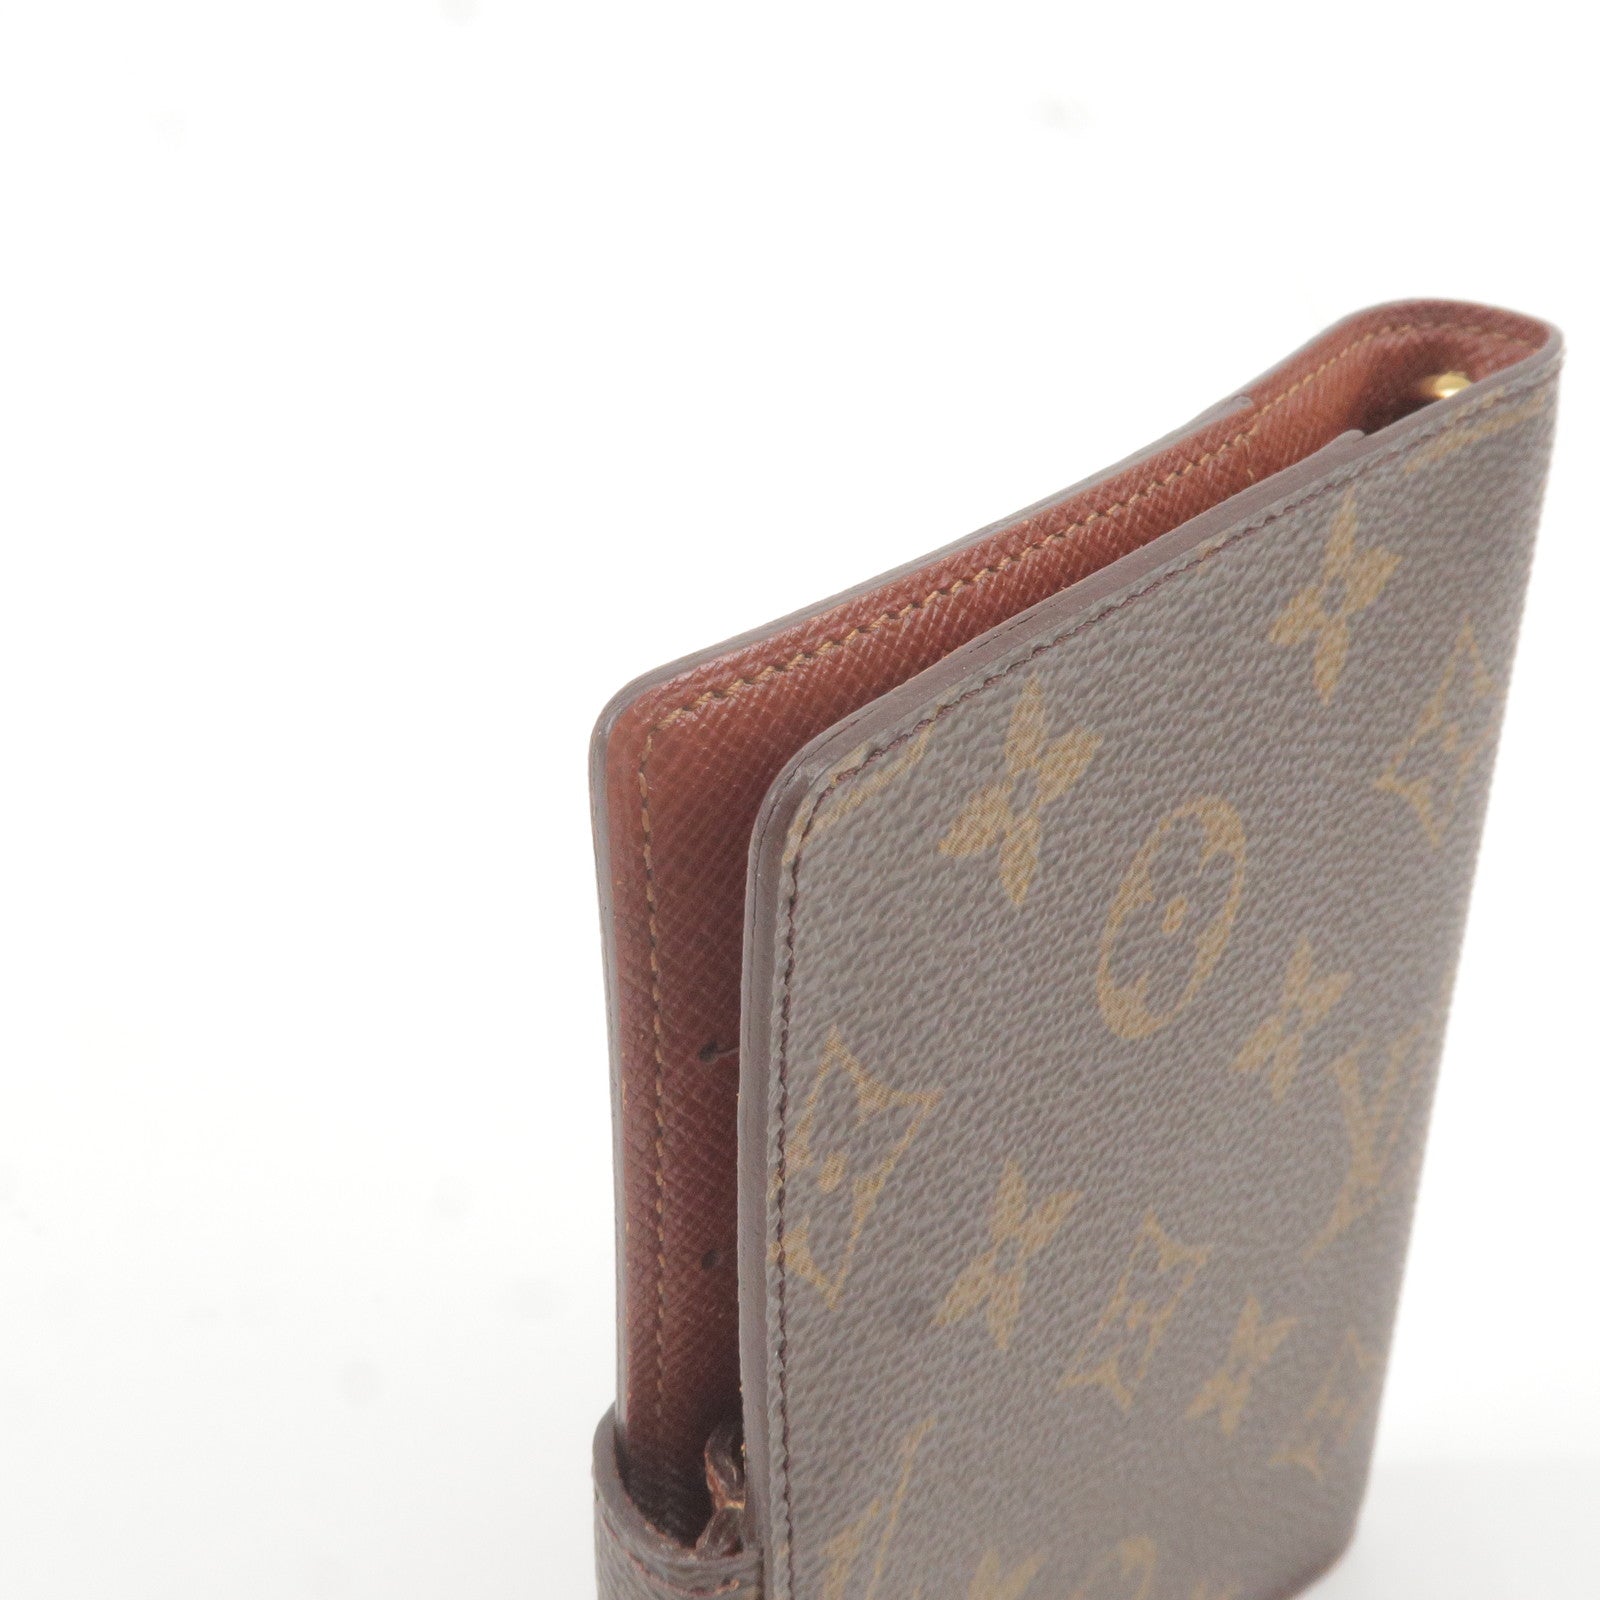 Louis Vuitton Agenda Cover Black Leather Wallet (Pre-Owned)